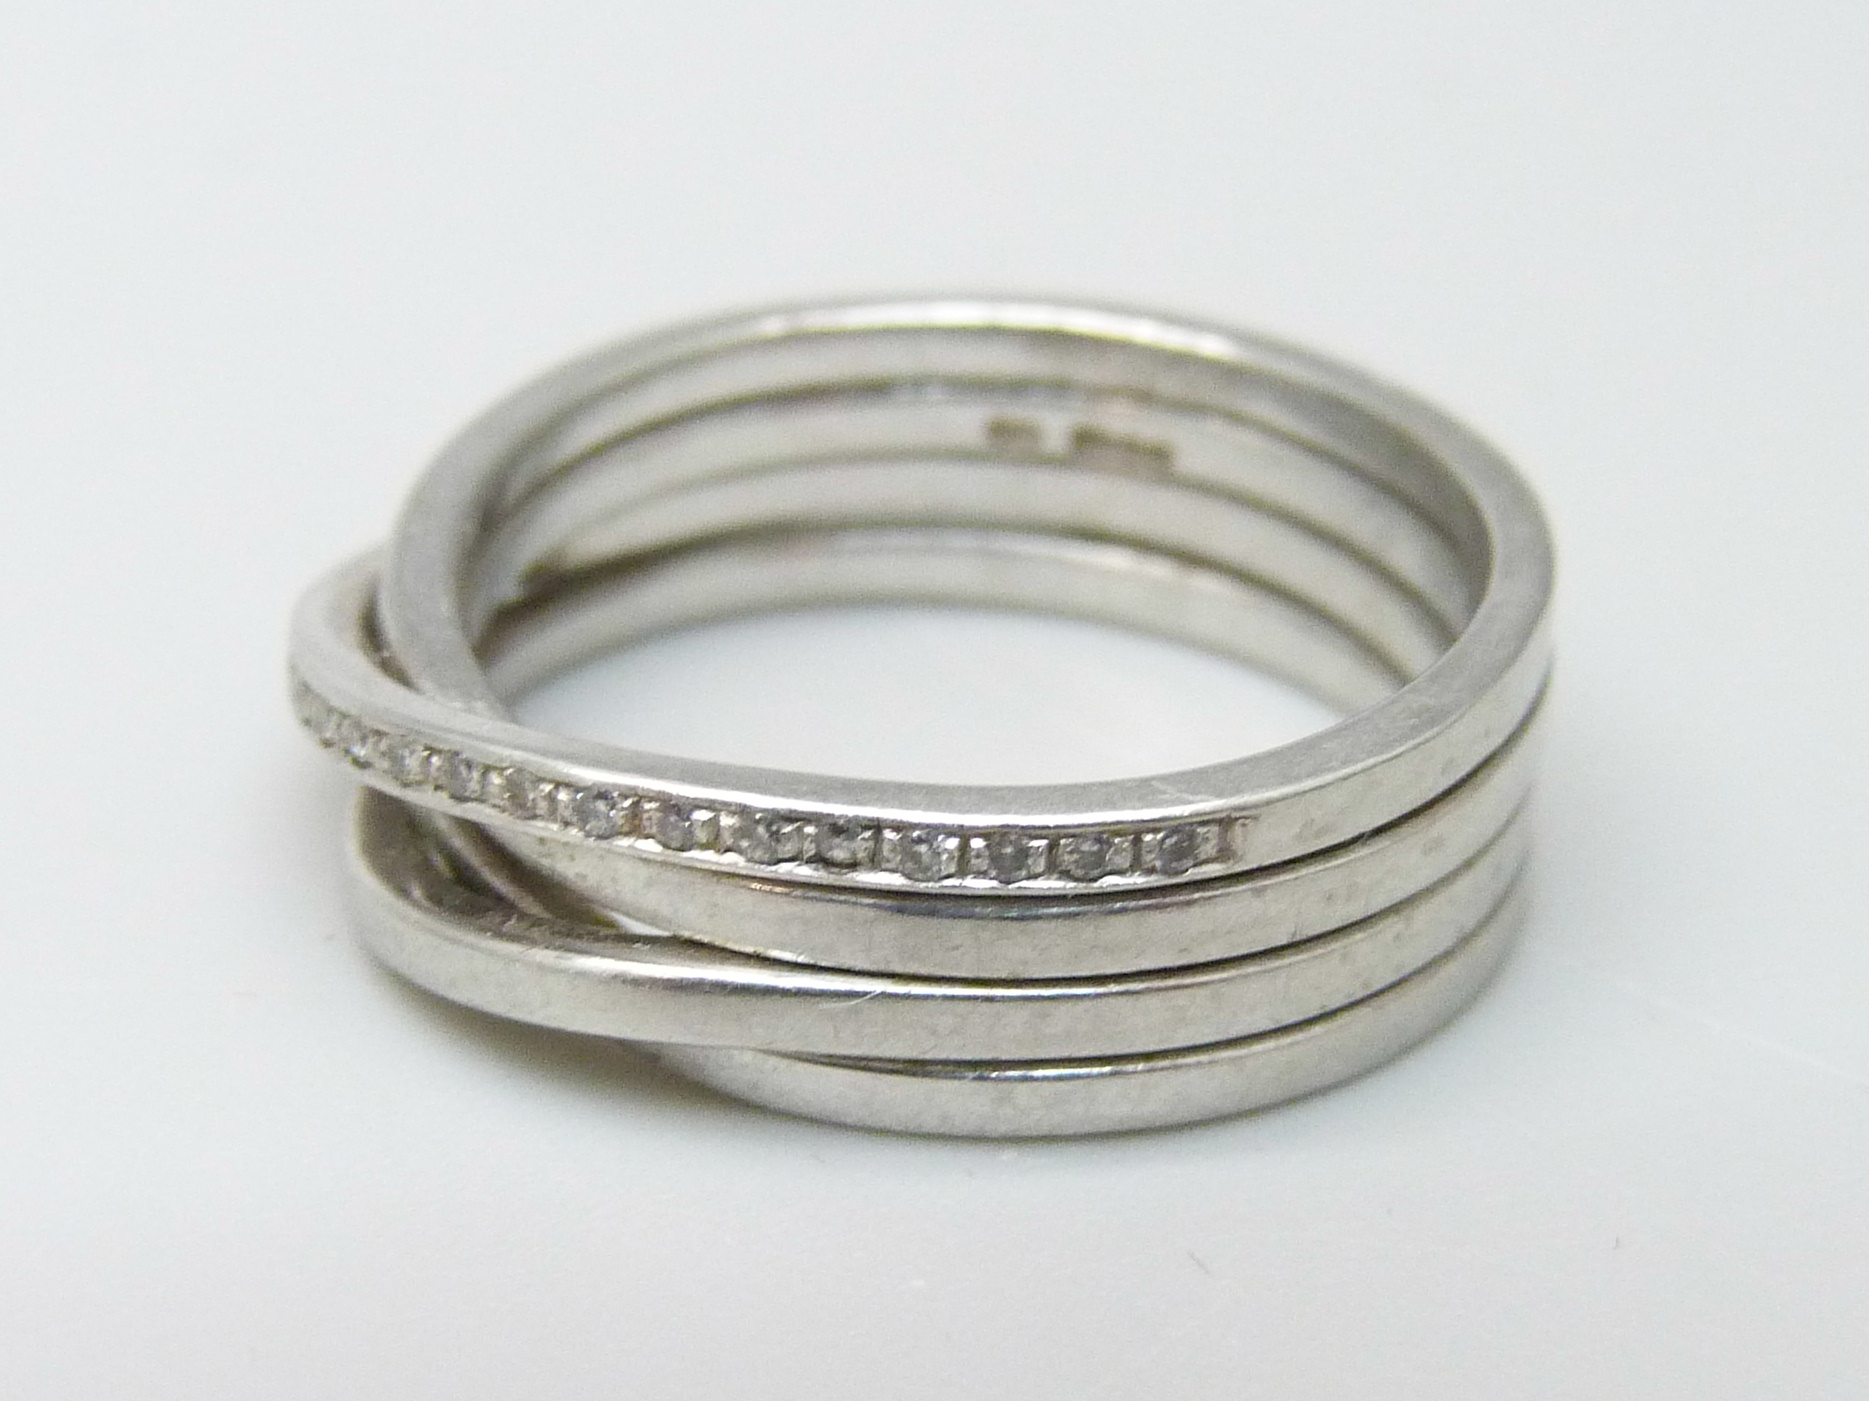 A 950 platinum and 28 diamond ring, 7.9g, M - Image 2 of 3